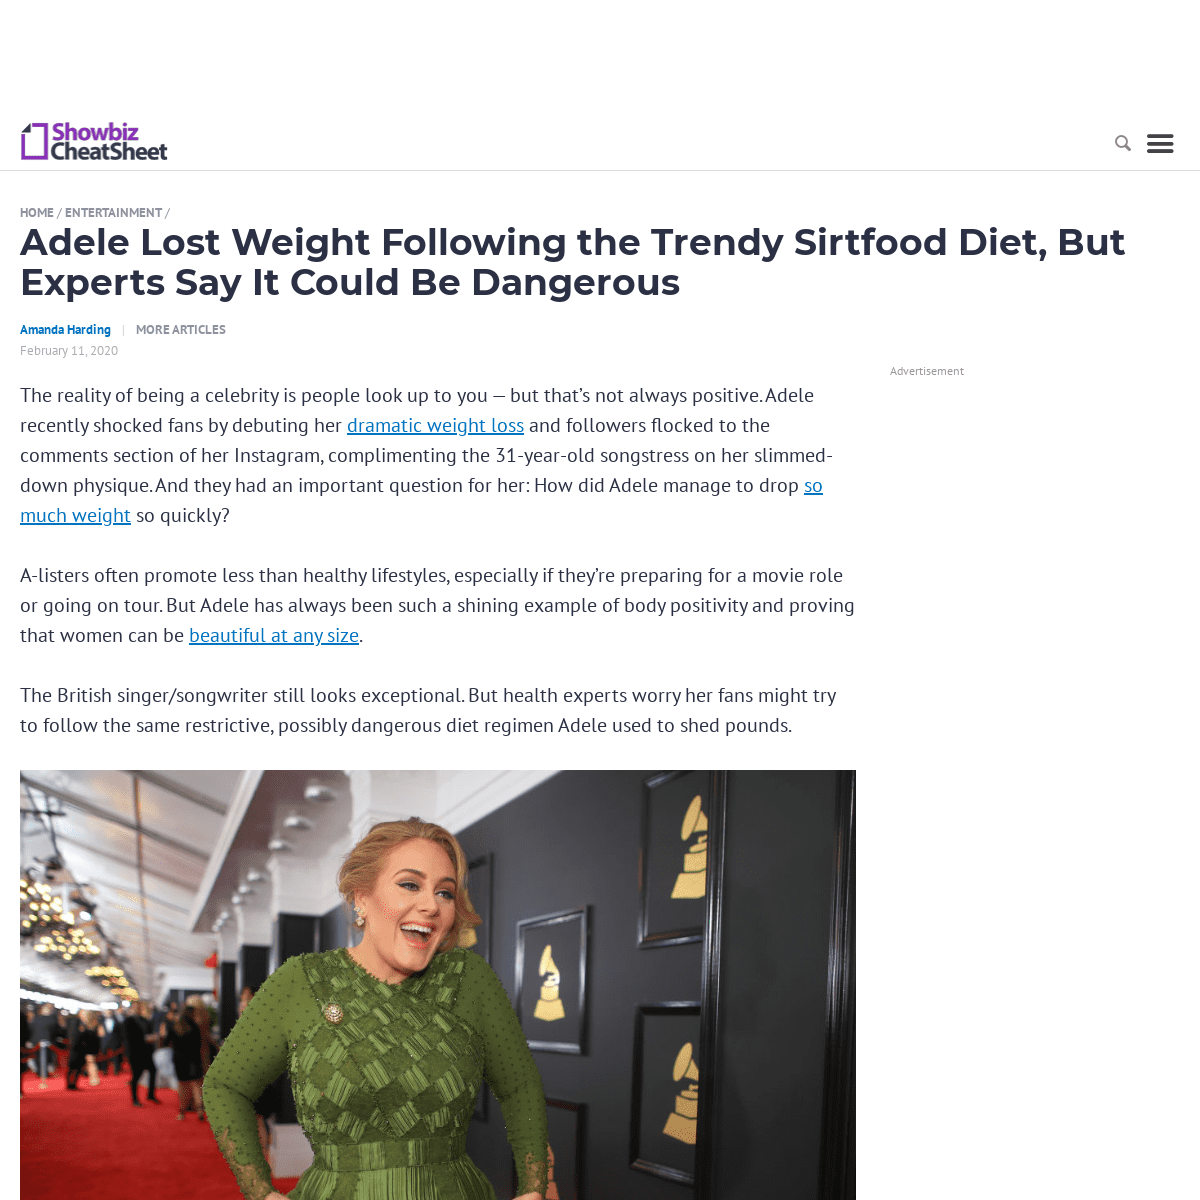 A complete backup of www.cheatsheet.com/entertainment/adele-lost-weight-following-the-trendy-sirtfood-diet-but-experts-say-it-co